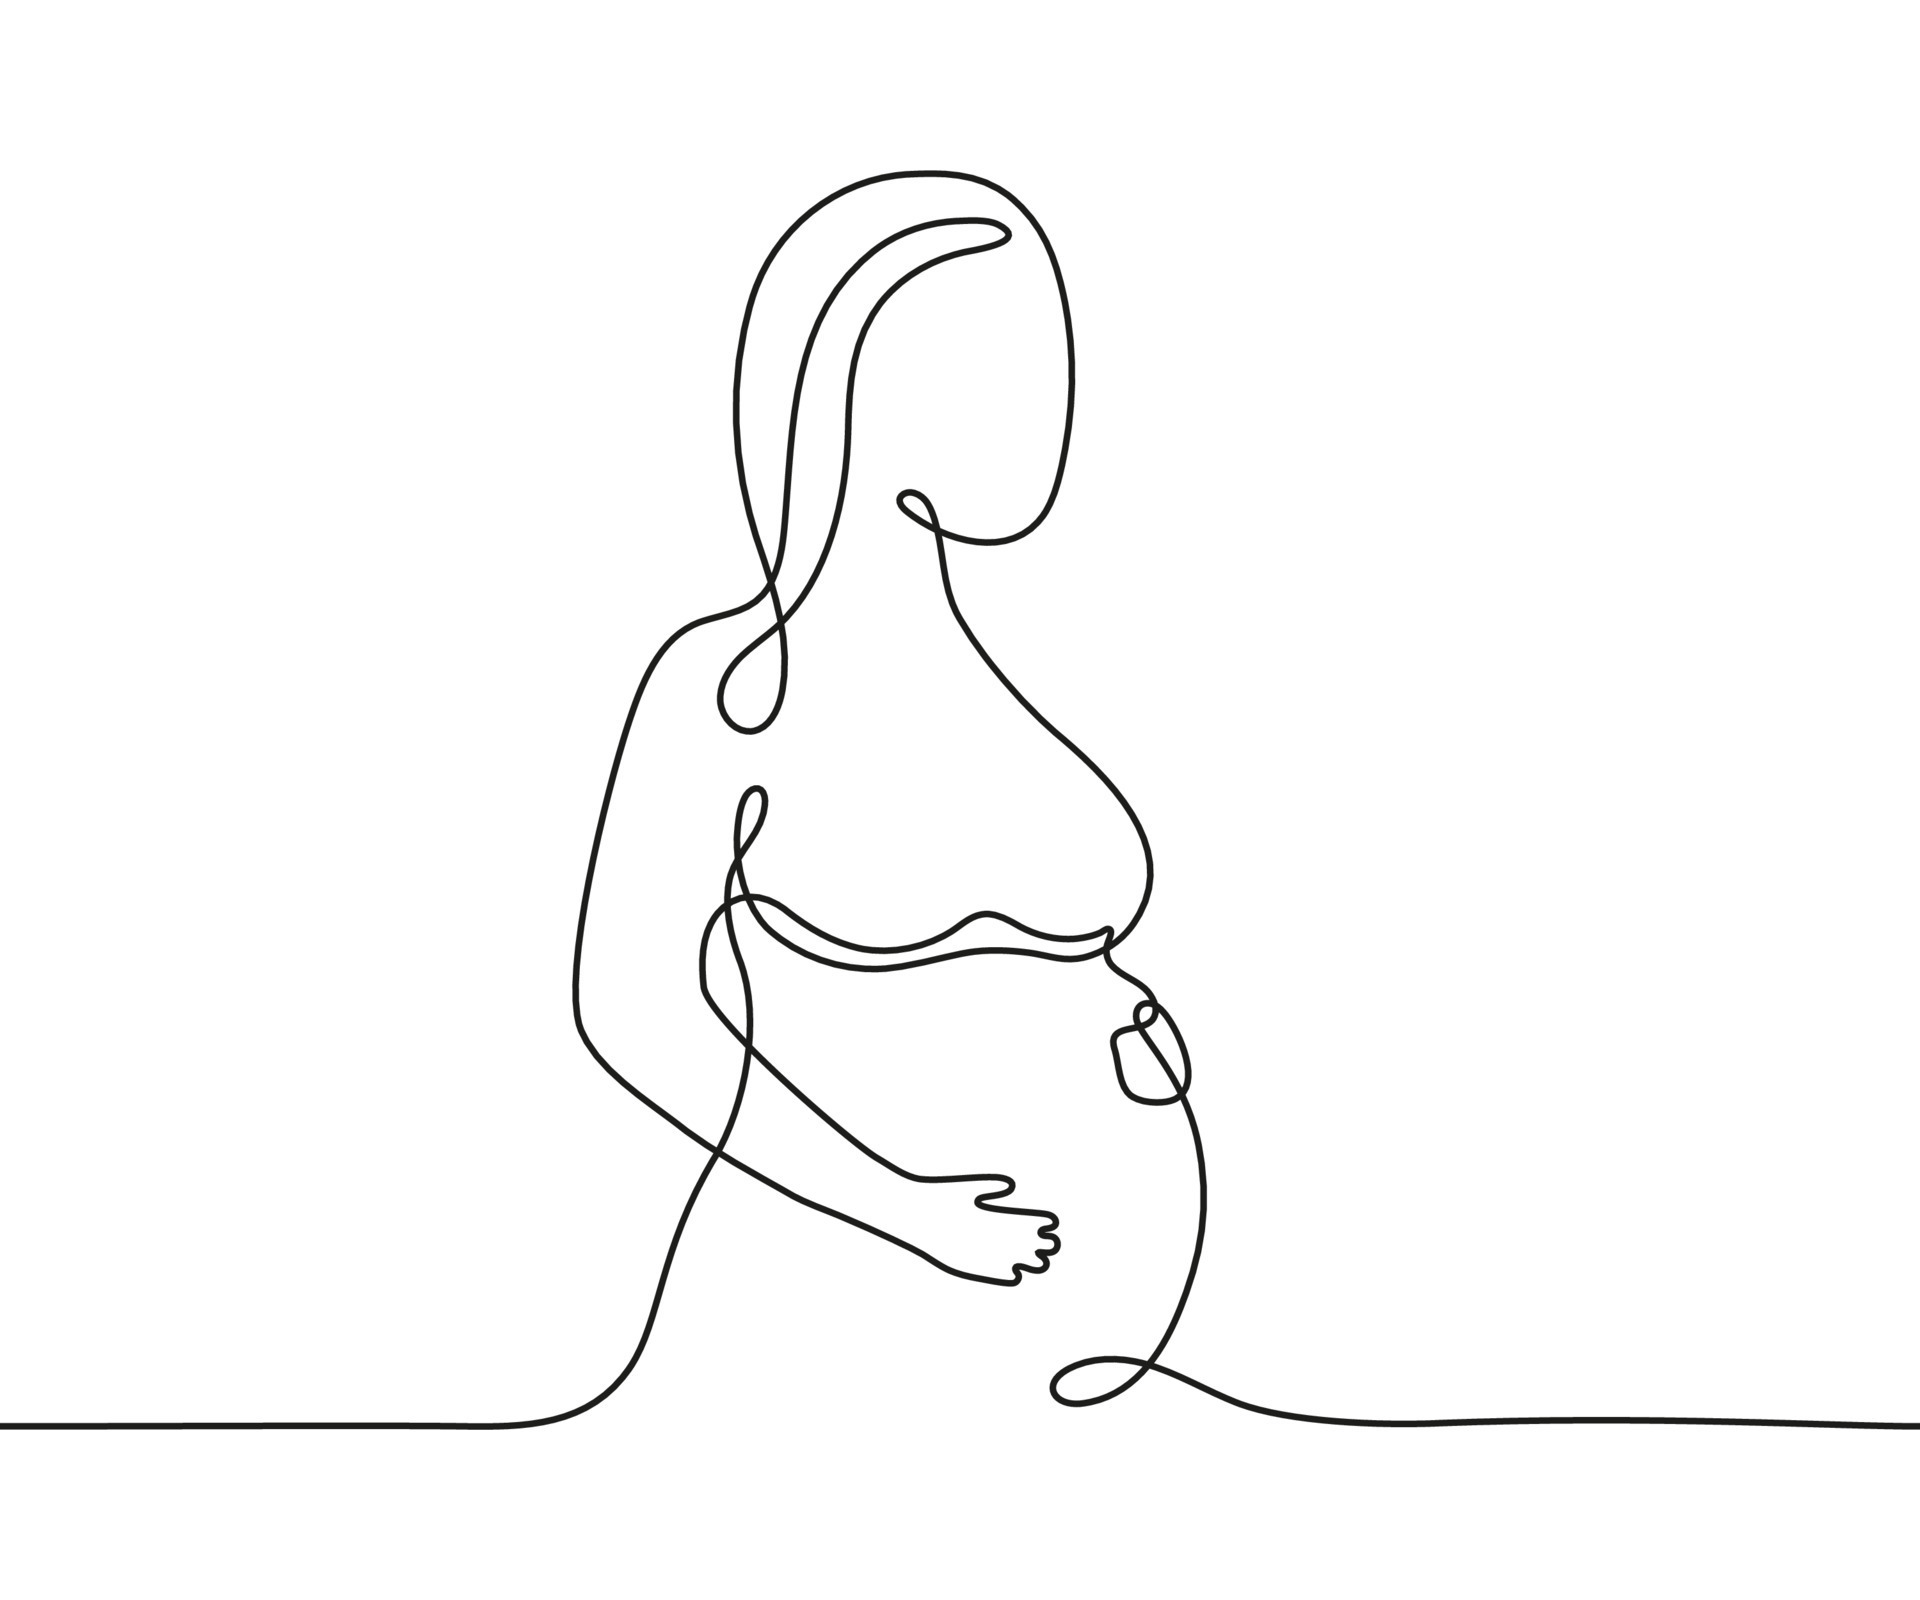 Pregnant woman, continuous art line one drawing. Pregnancy woman